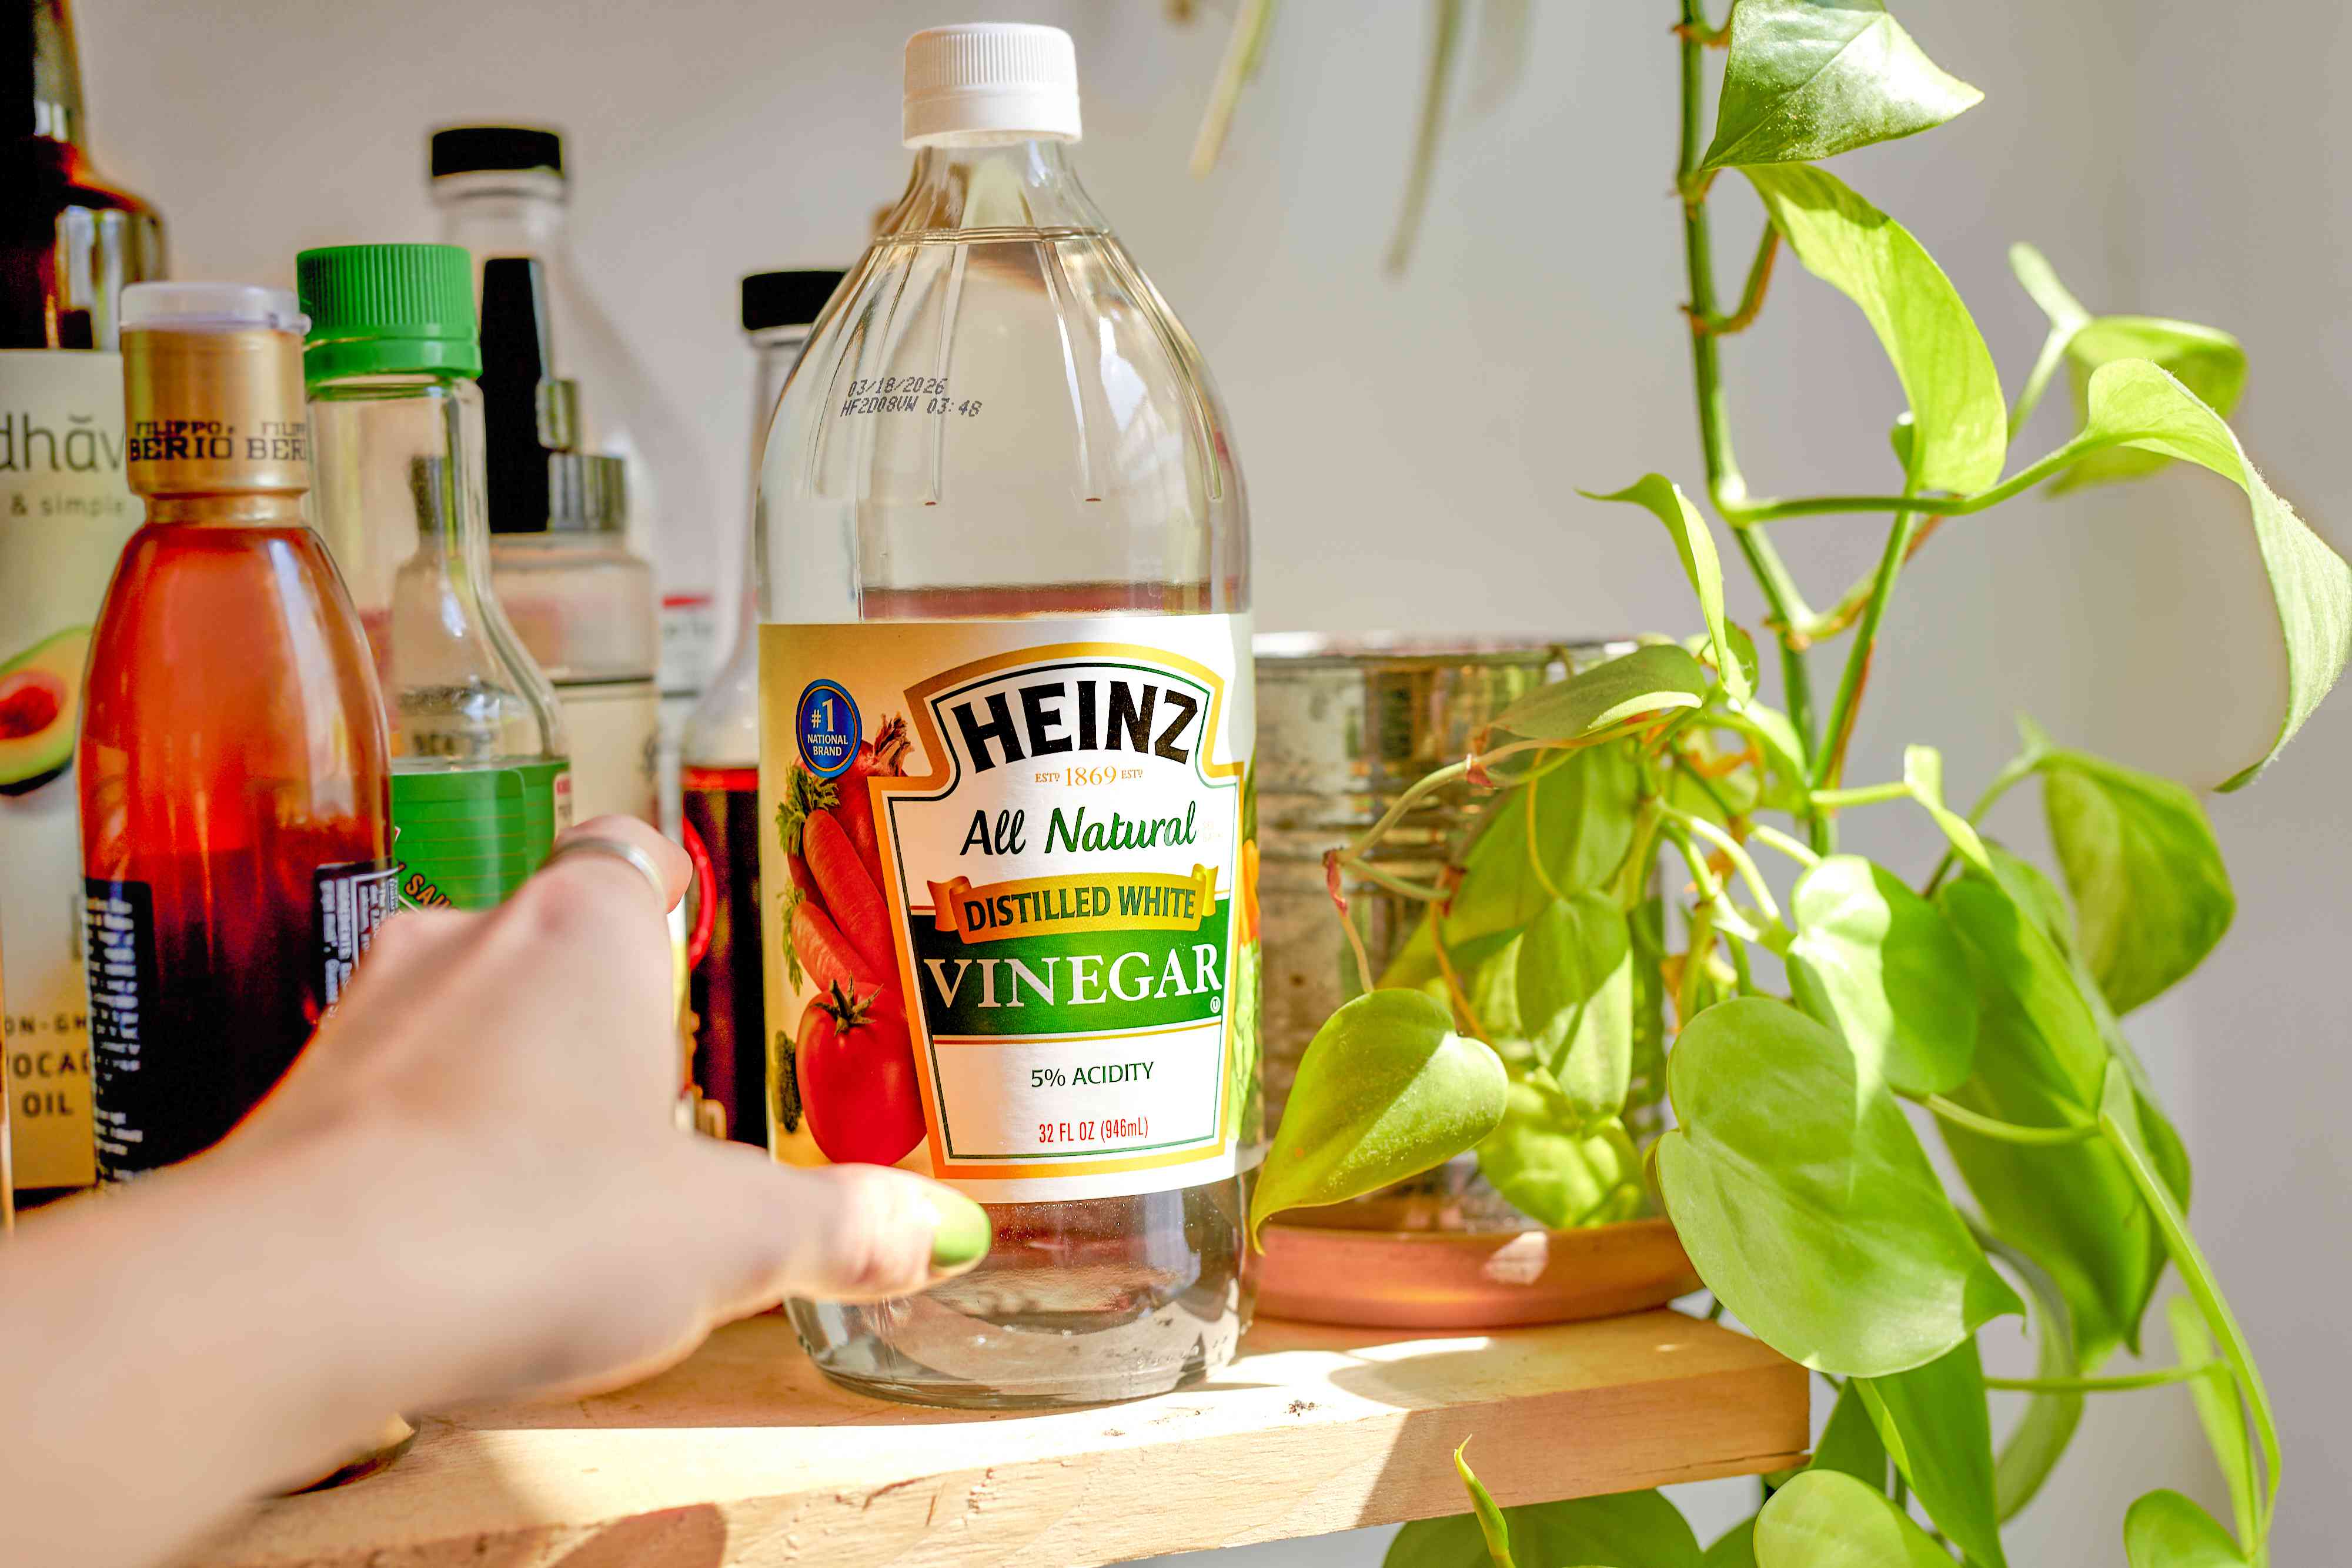 7 Things You Should Never Ever Clean With Vinegar, According to a Scientist and a Cleaning Expert